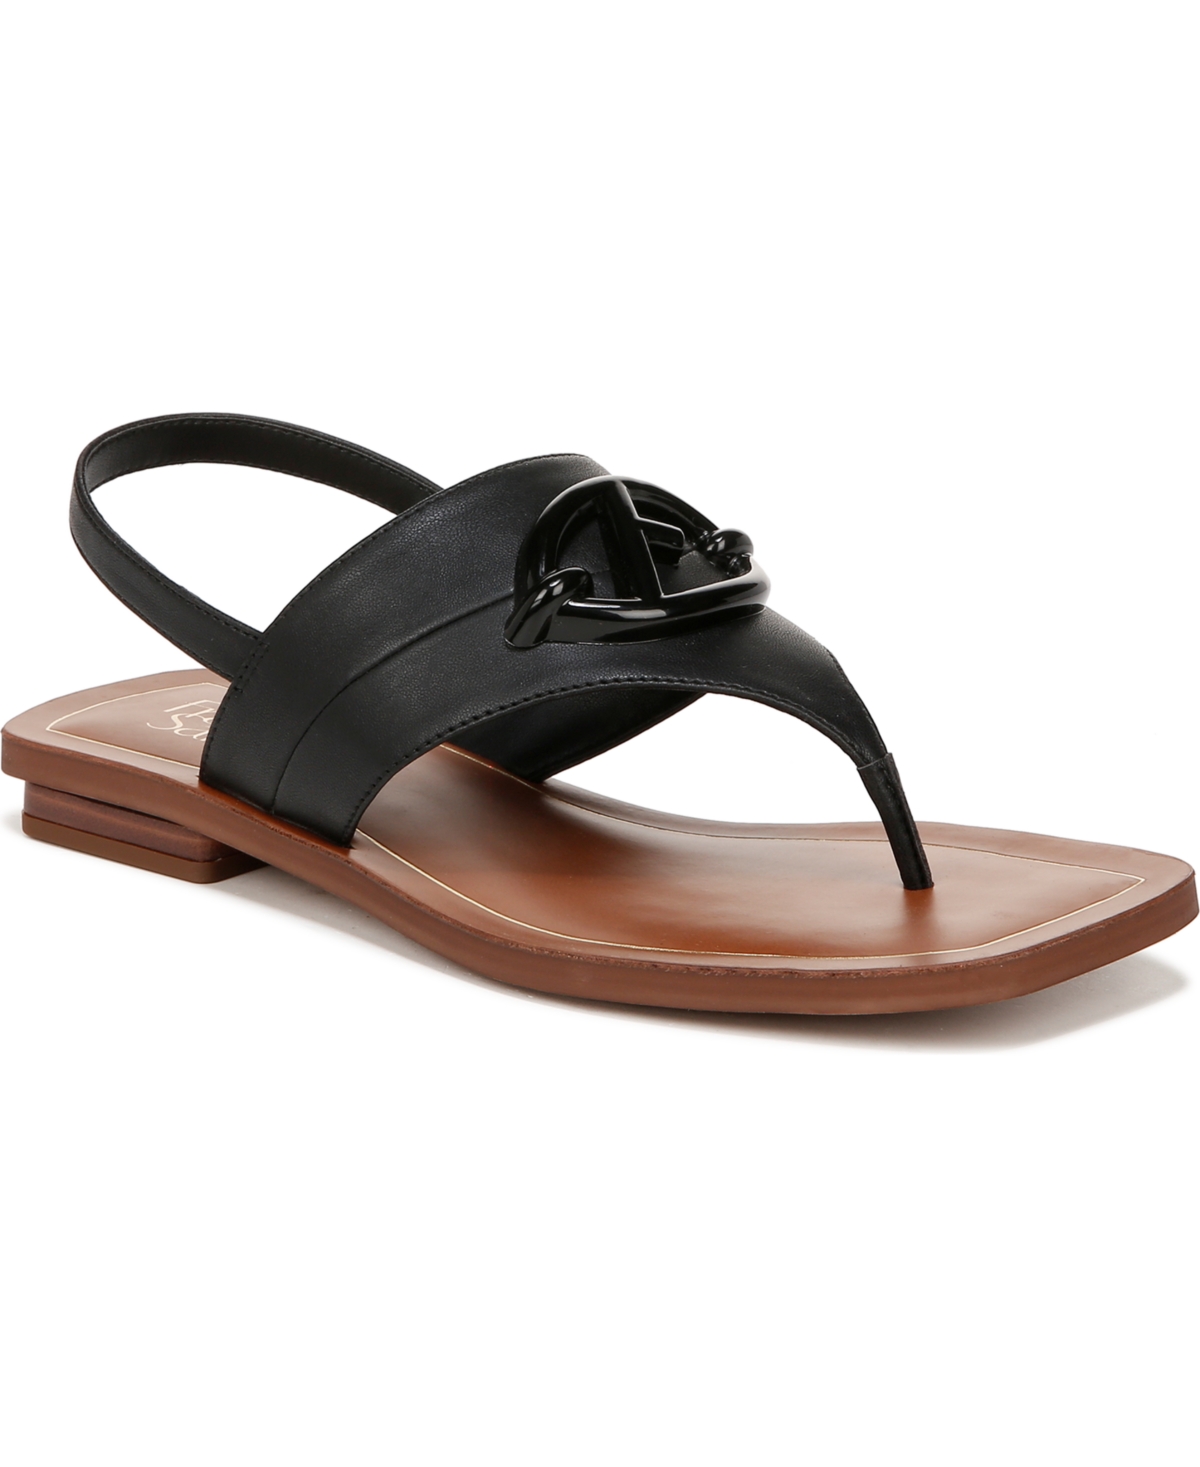 Women's Emmie Slingback Thong Sandals - Dark Teal Faux Leather